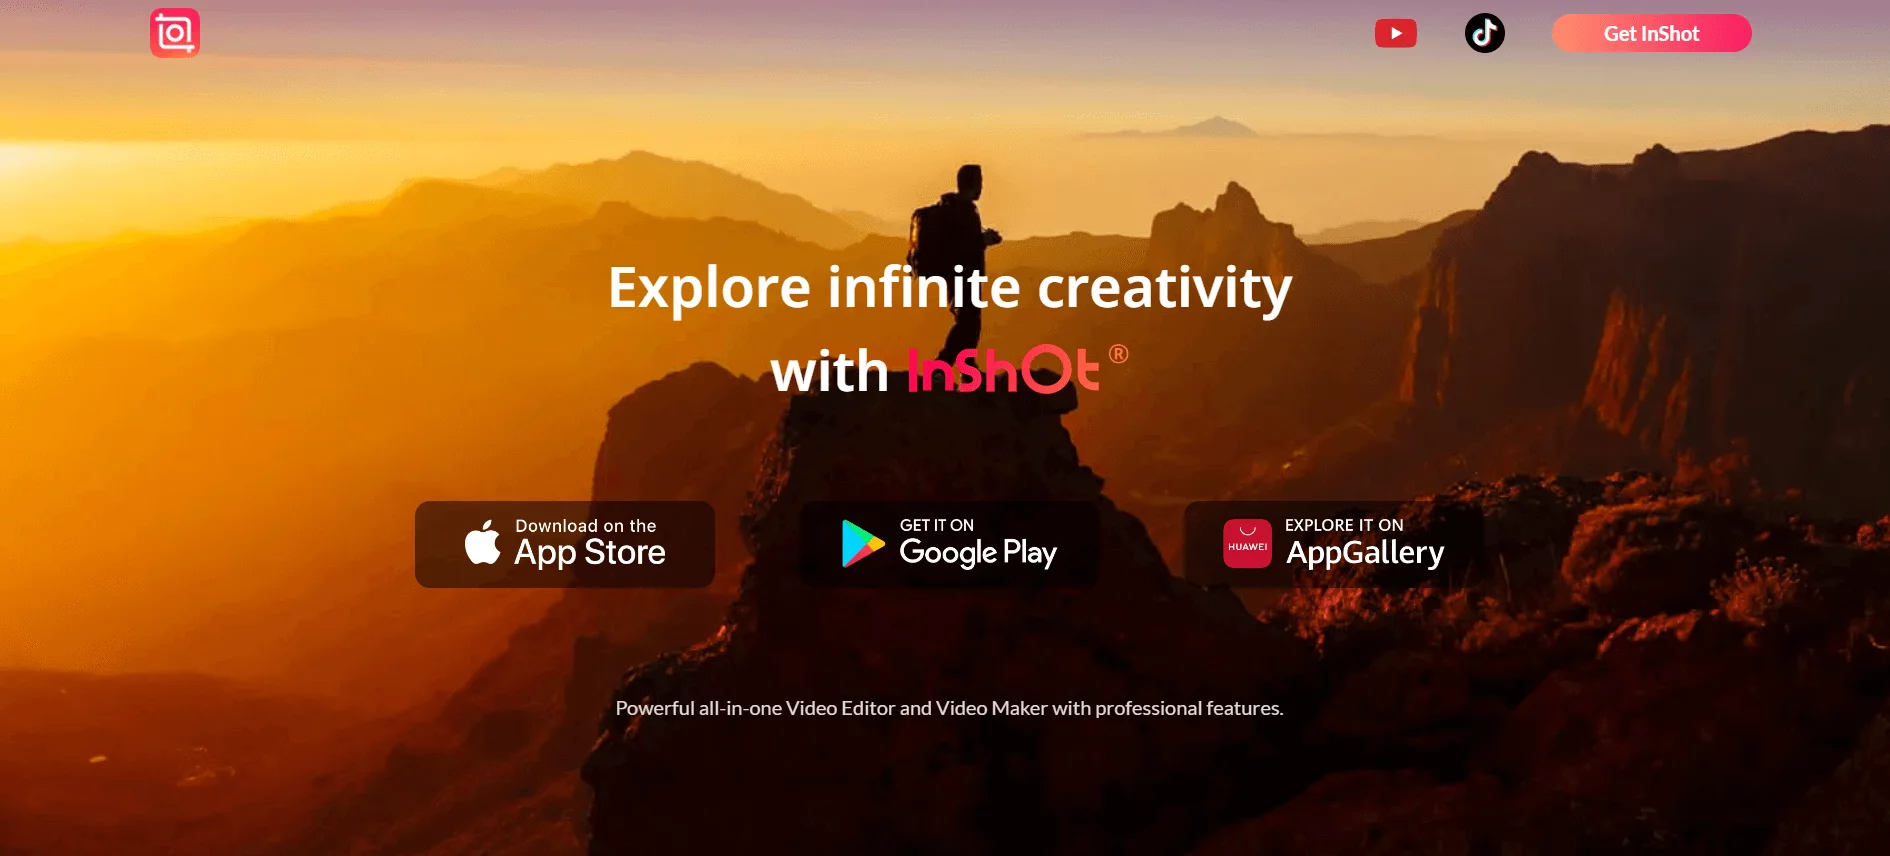 InShot video editing app website header featuring a breathtaking sunset over rugged mountains with a silhouette of a person holding a camera, highlighting the theme "Explore infinite creativity with InShot."